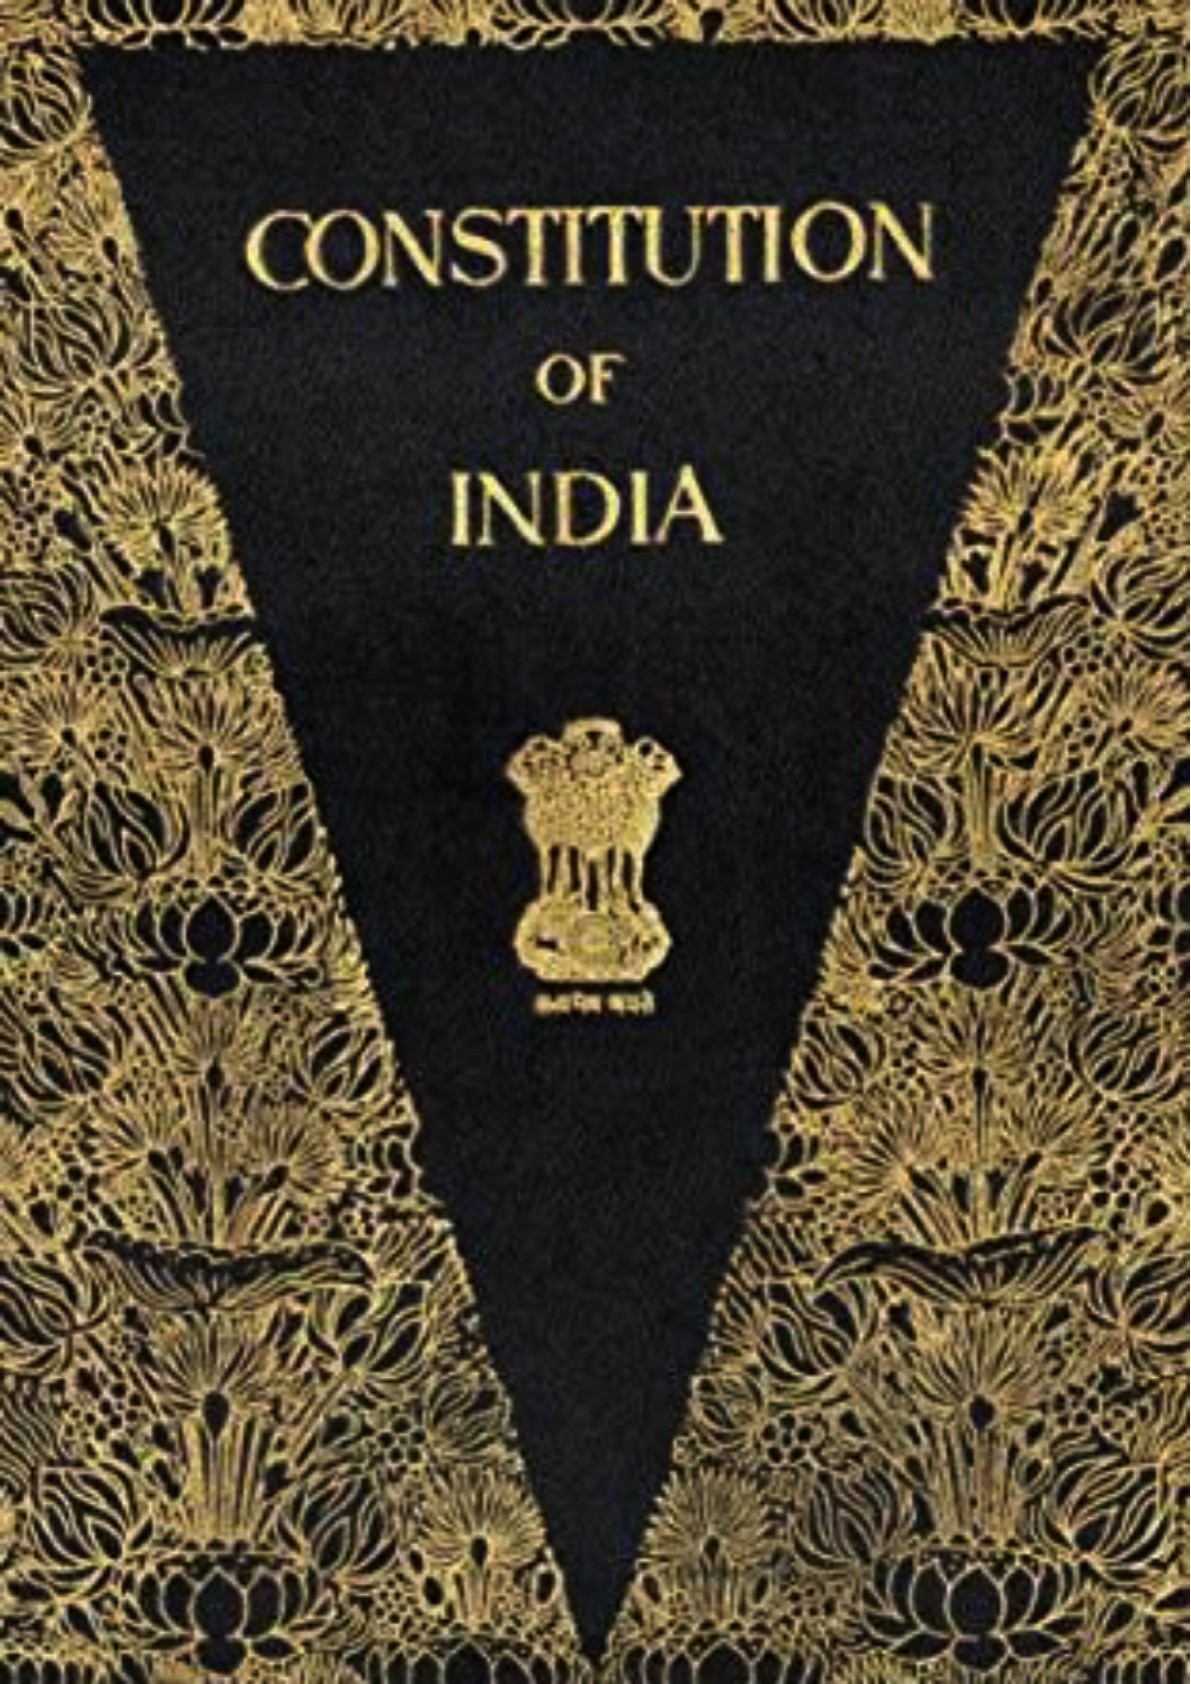 Features Of The Indian Constitution: 19 Key Characteristics - Bscholarly